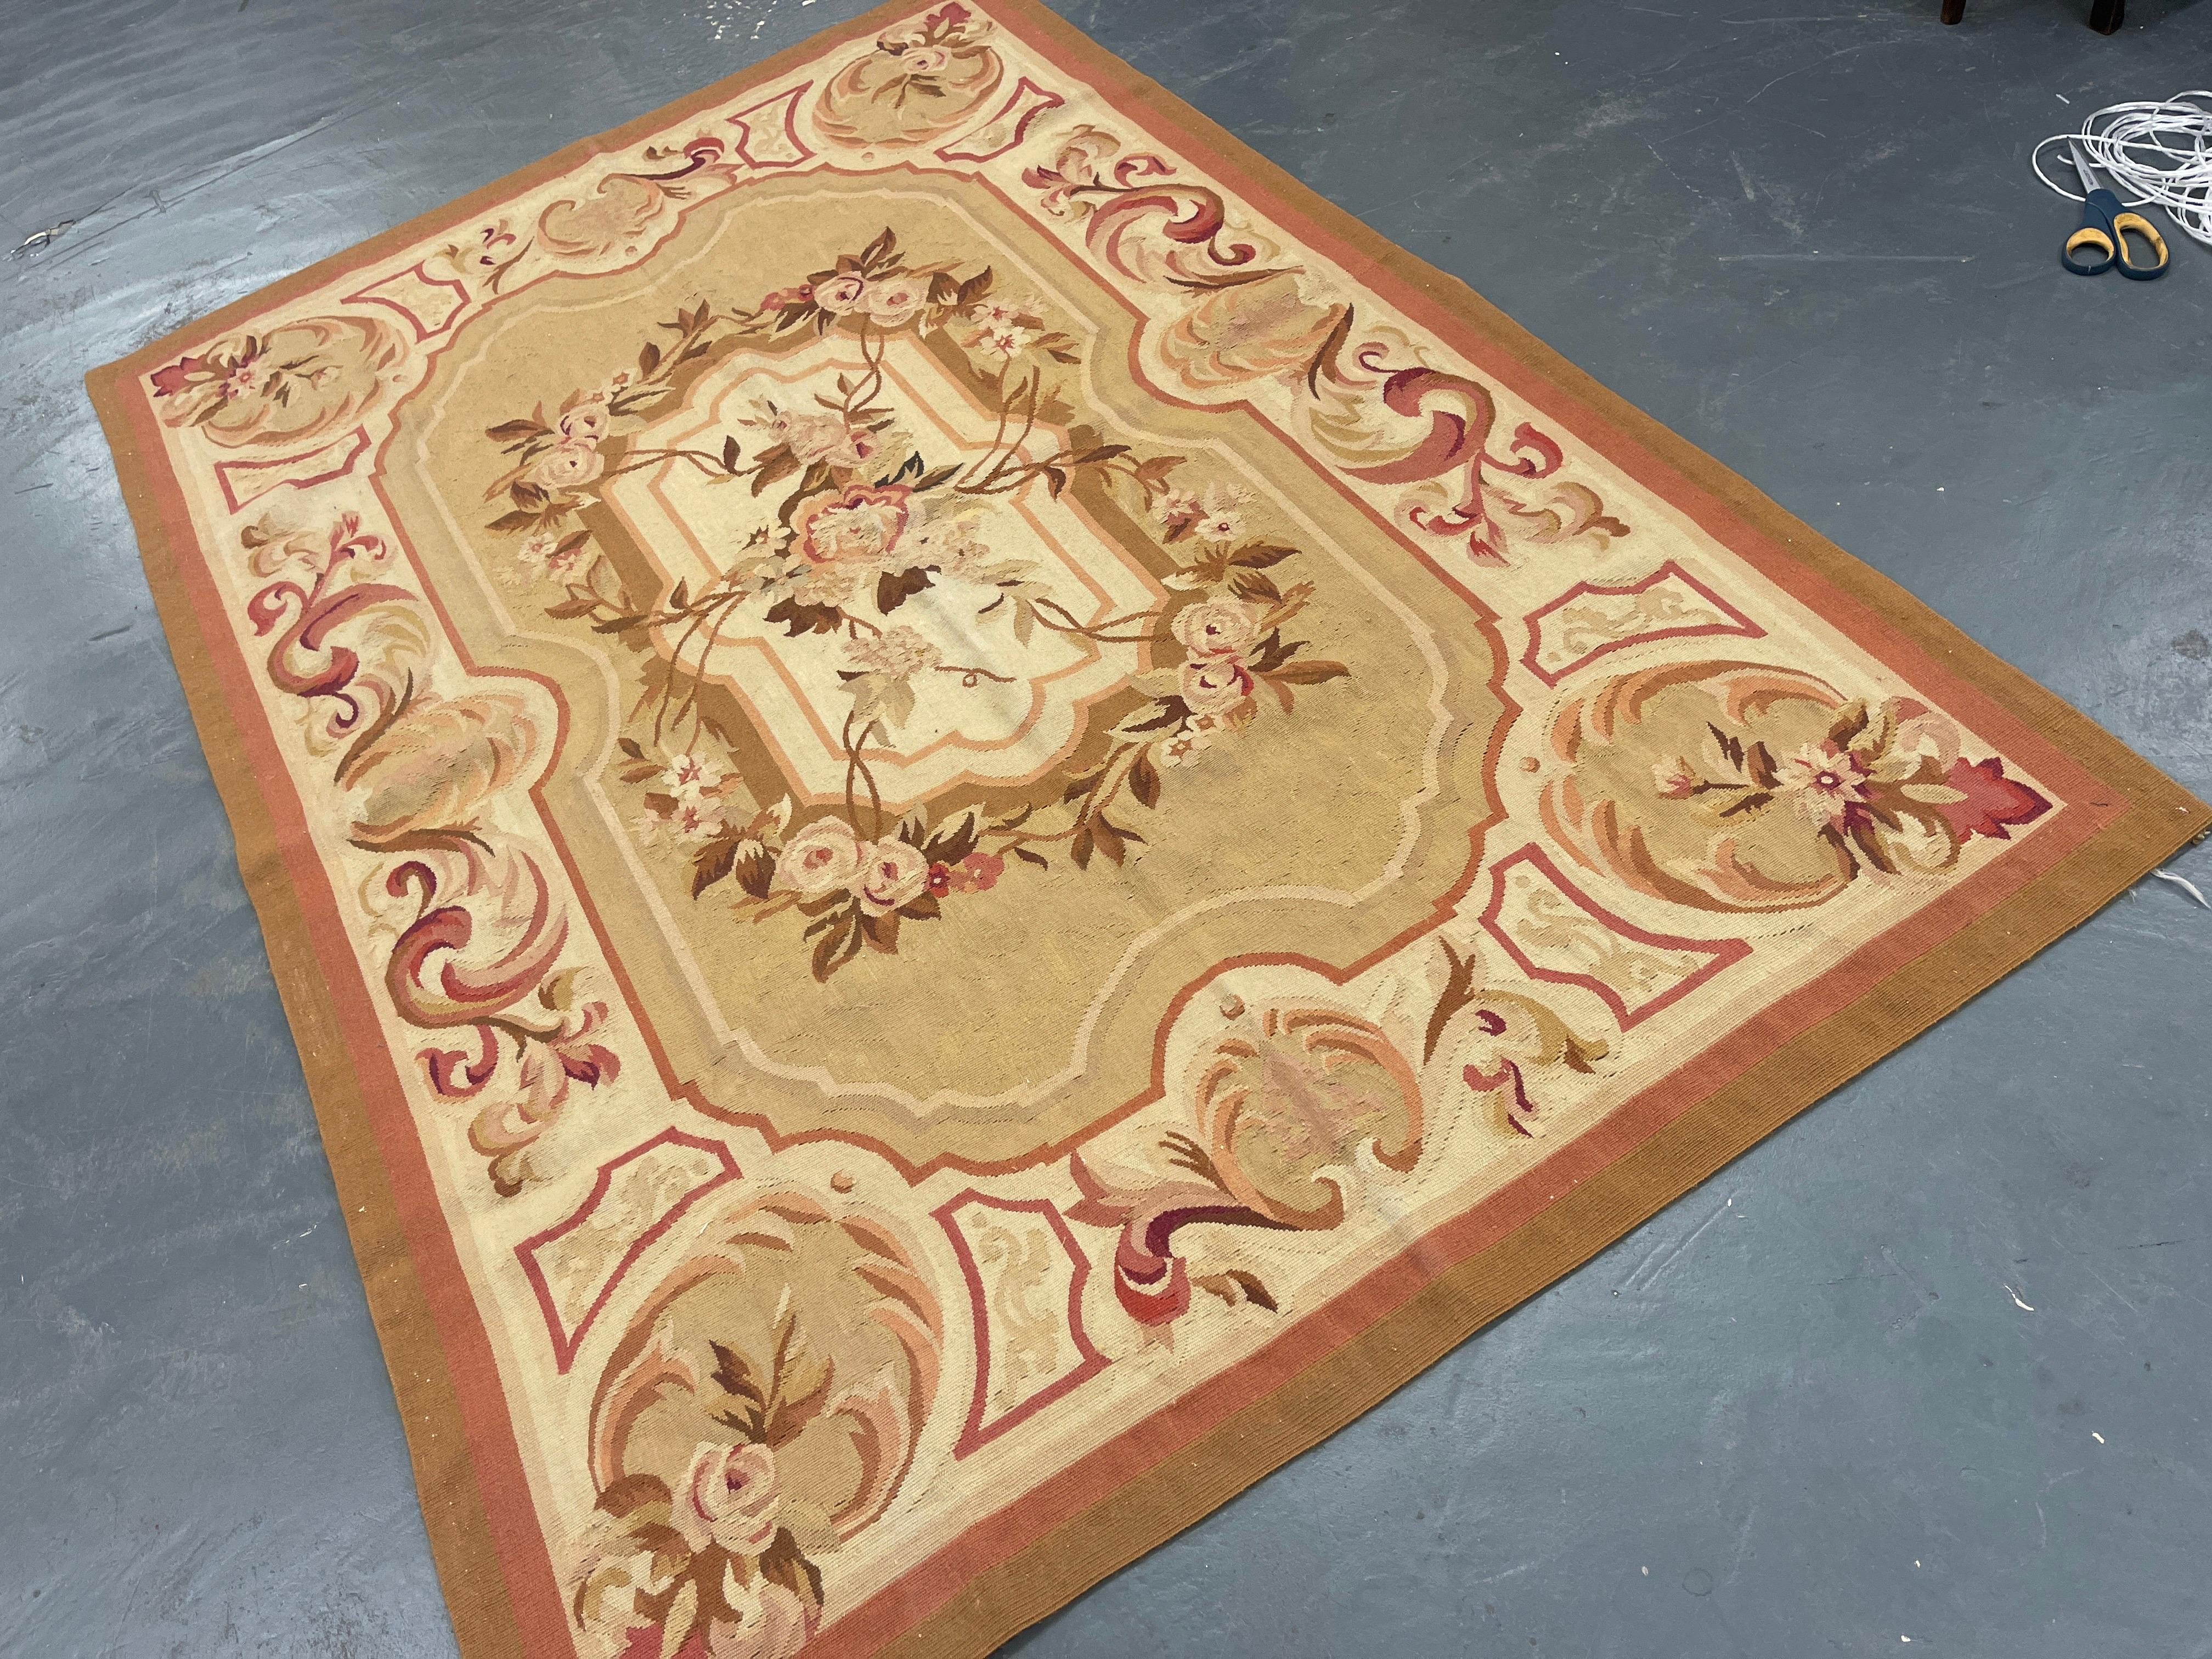 This fantastic area rug has been handwoven with a beautiful symmetrical floral design woven on a golden brown background with cream-green and pink accents. This elegant piece's colour and design make it the perfect accent rug.
This style of rugs is